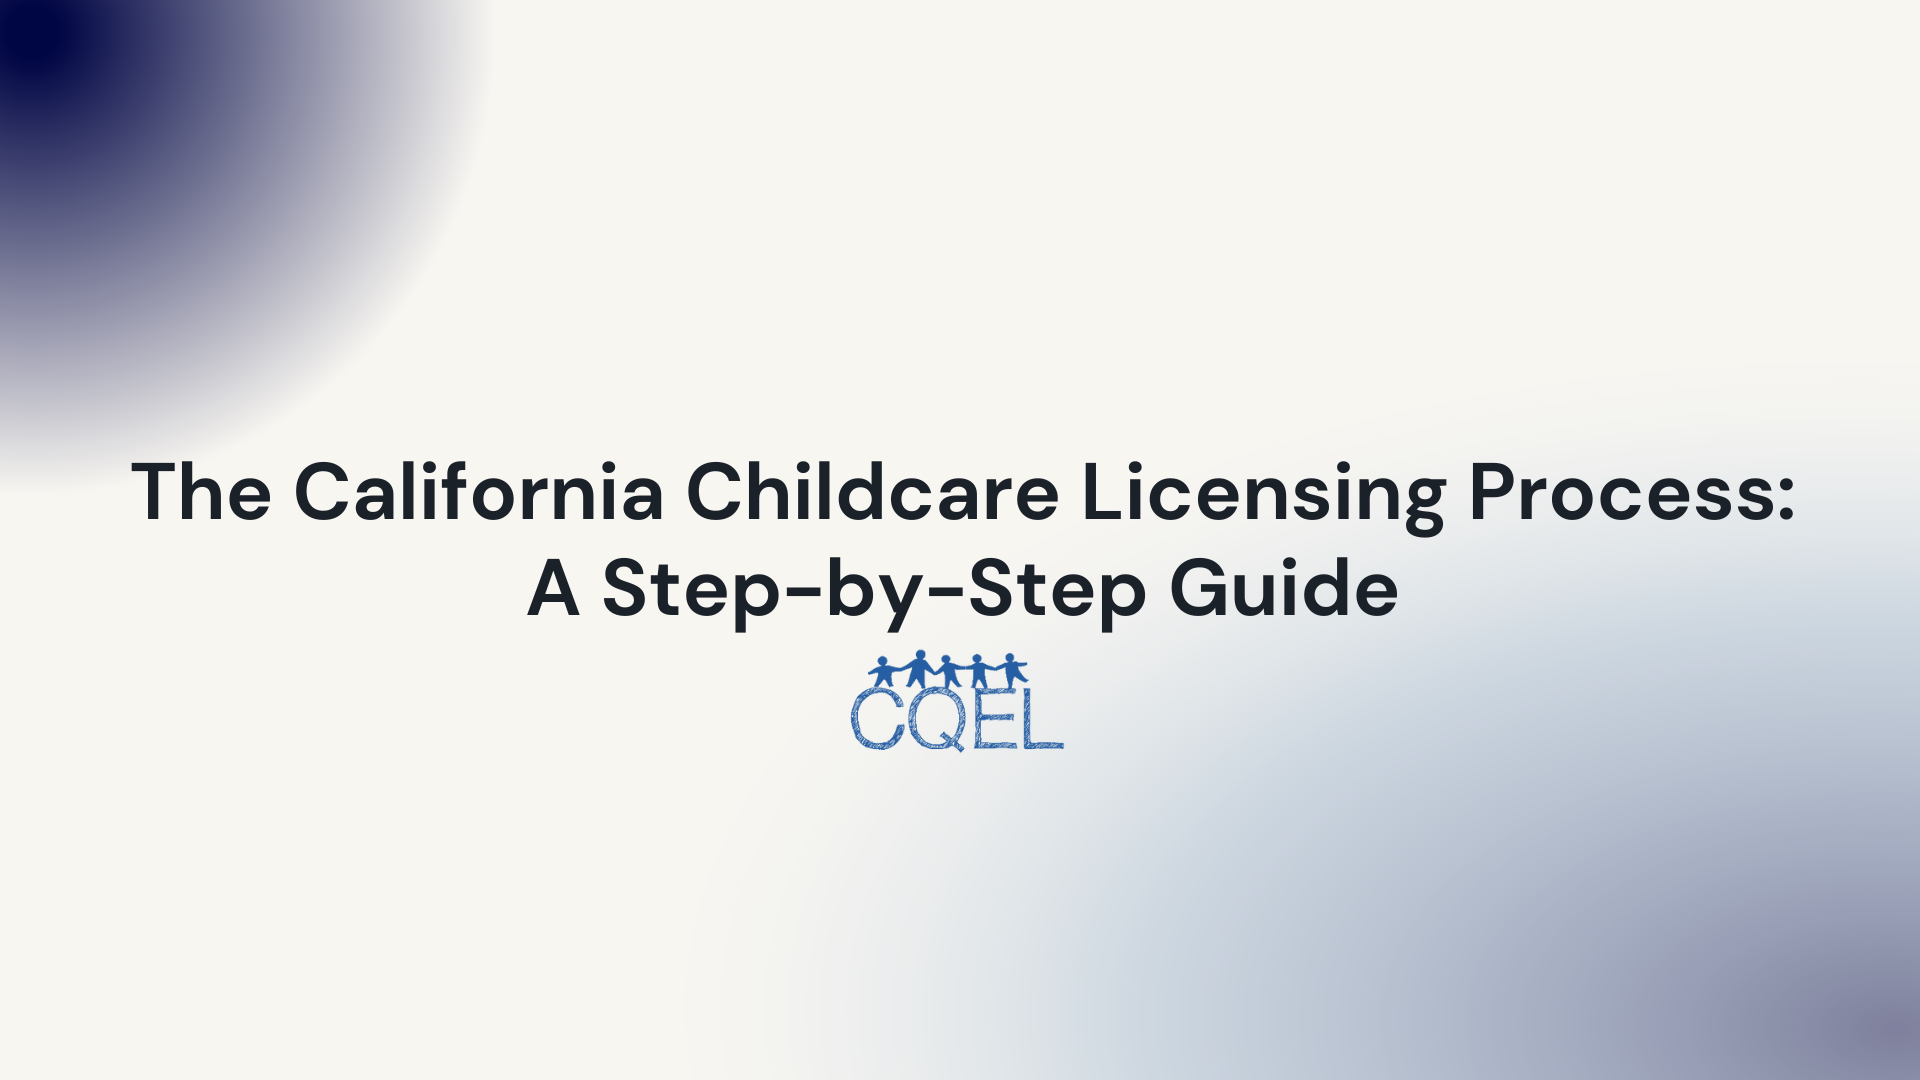 The California Childcare Licensing Process: A Step-by-Step Guide